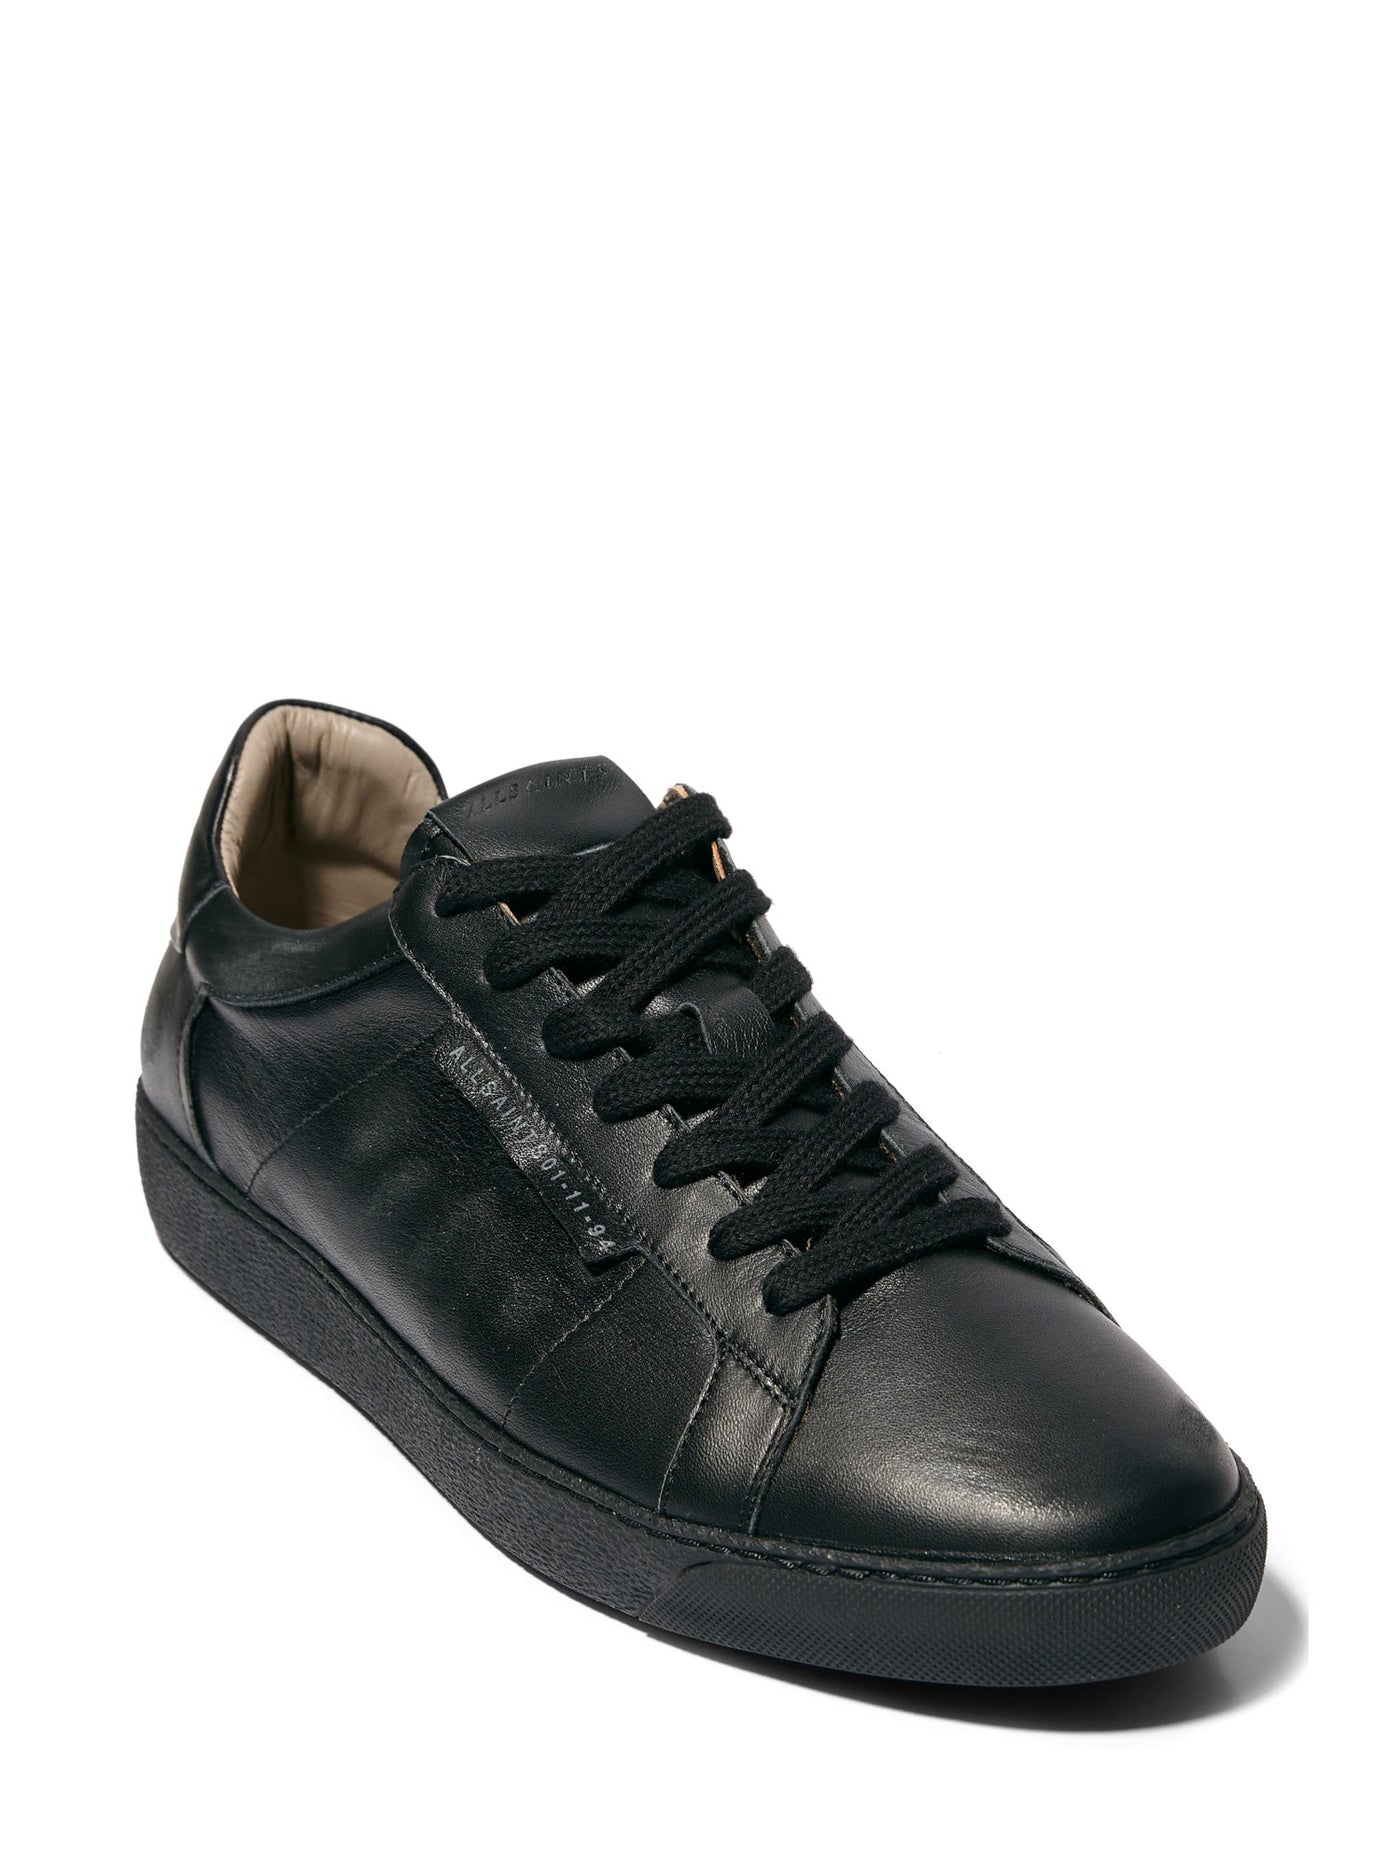 ALLSAINTS Mens Black Sheer Round Toe Platform Lace-Up Leather Athletic Sneakers Shoes 46